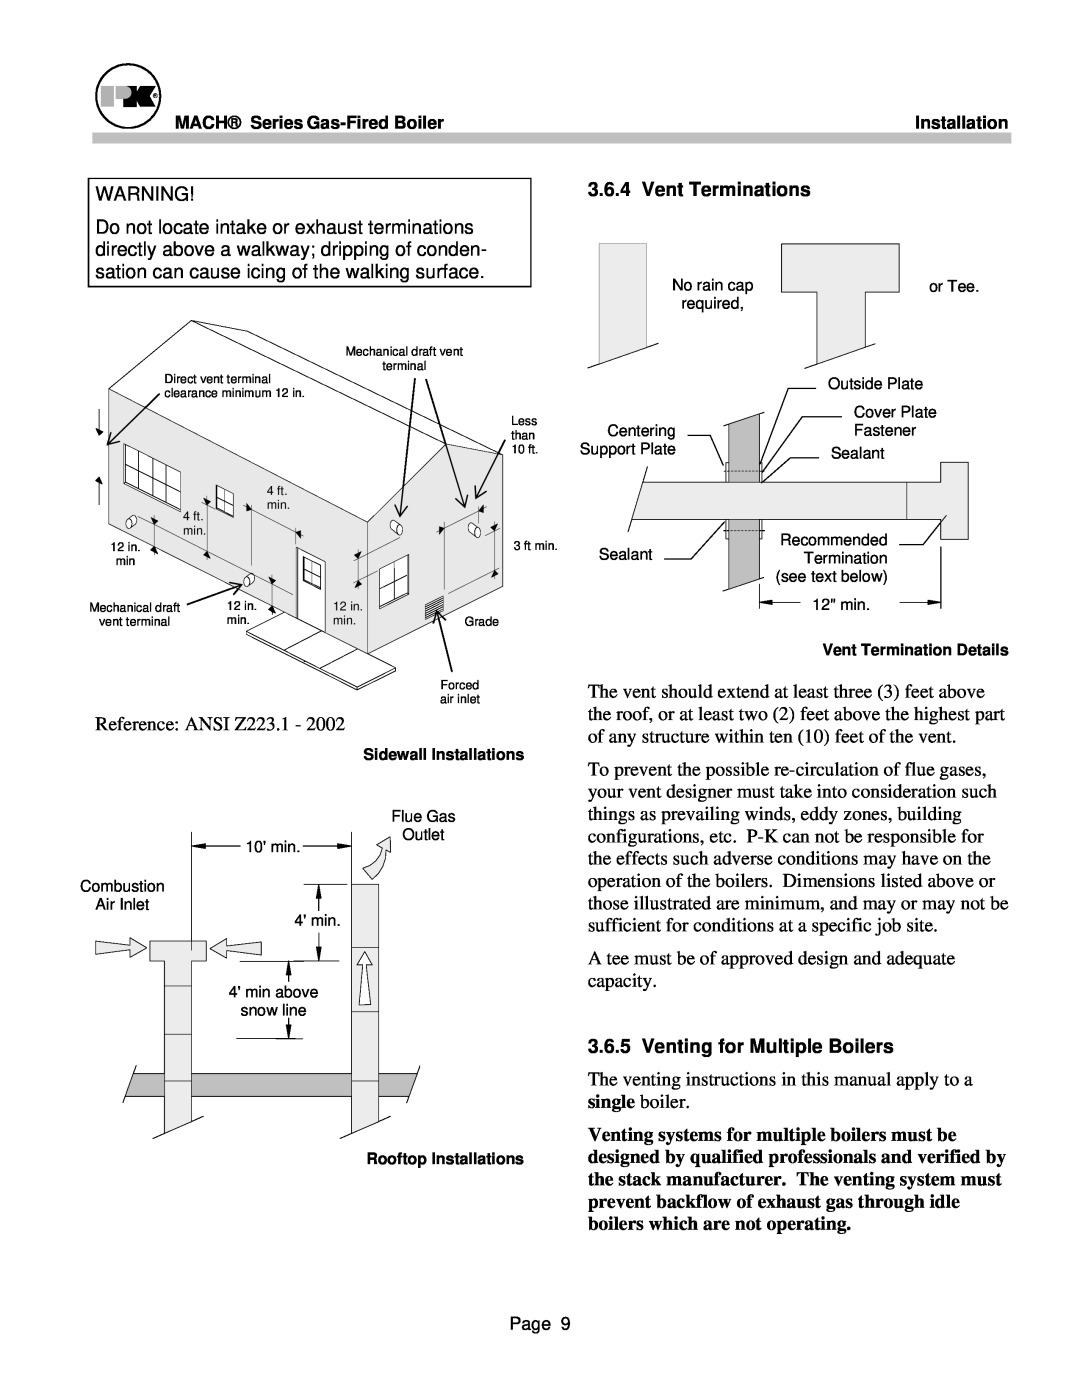 Patterson-Kelley MACH-05 manual Vent Terminations, Venting for Multiple Boilers 